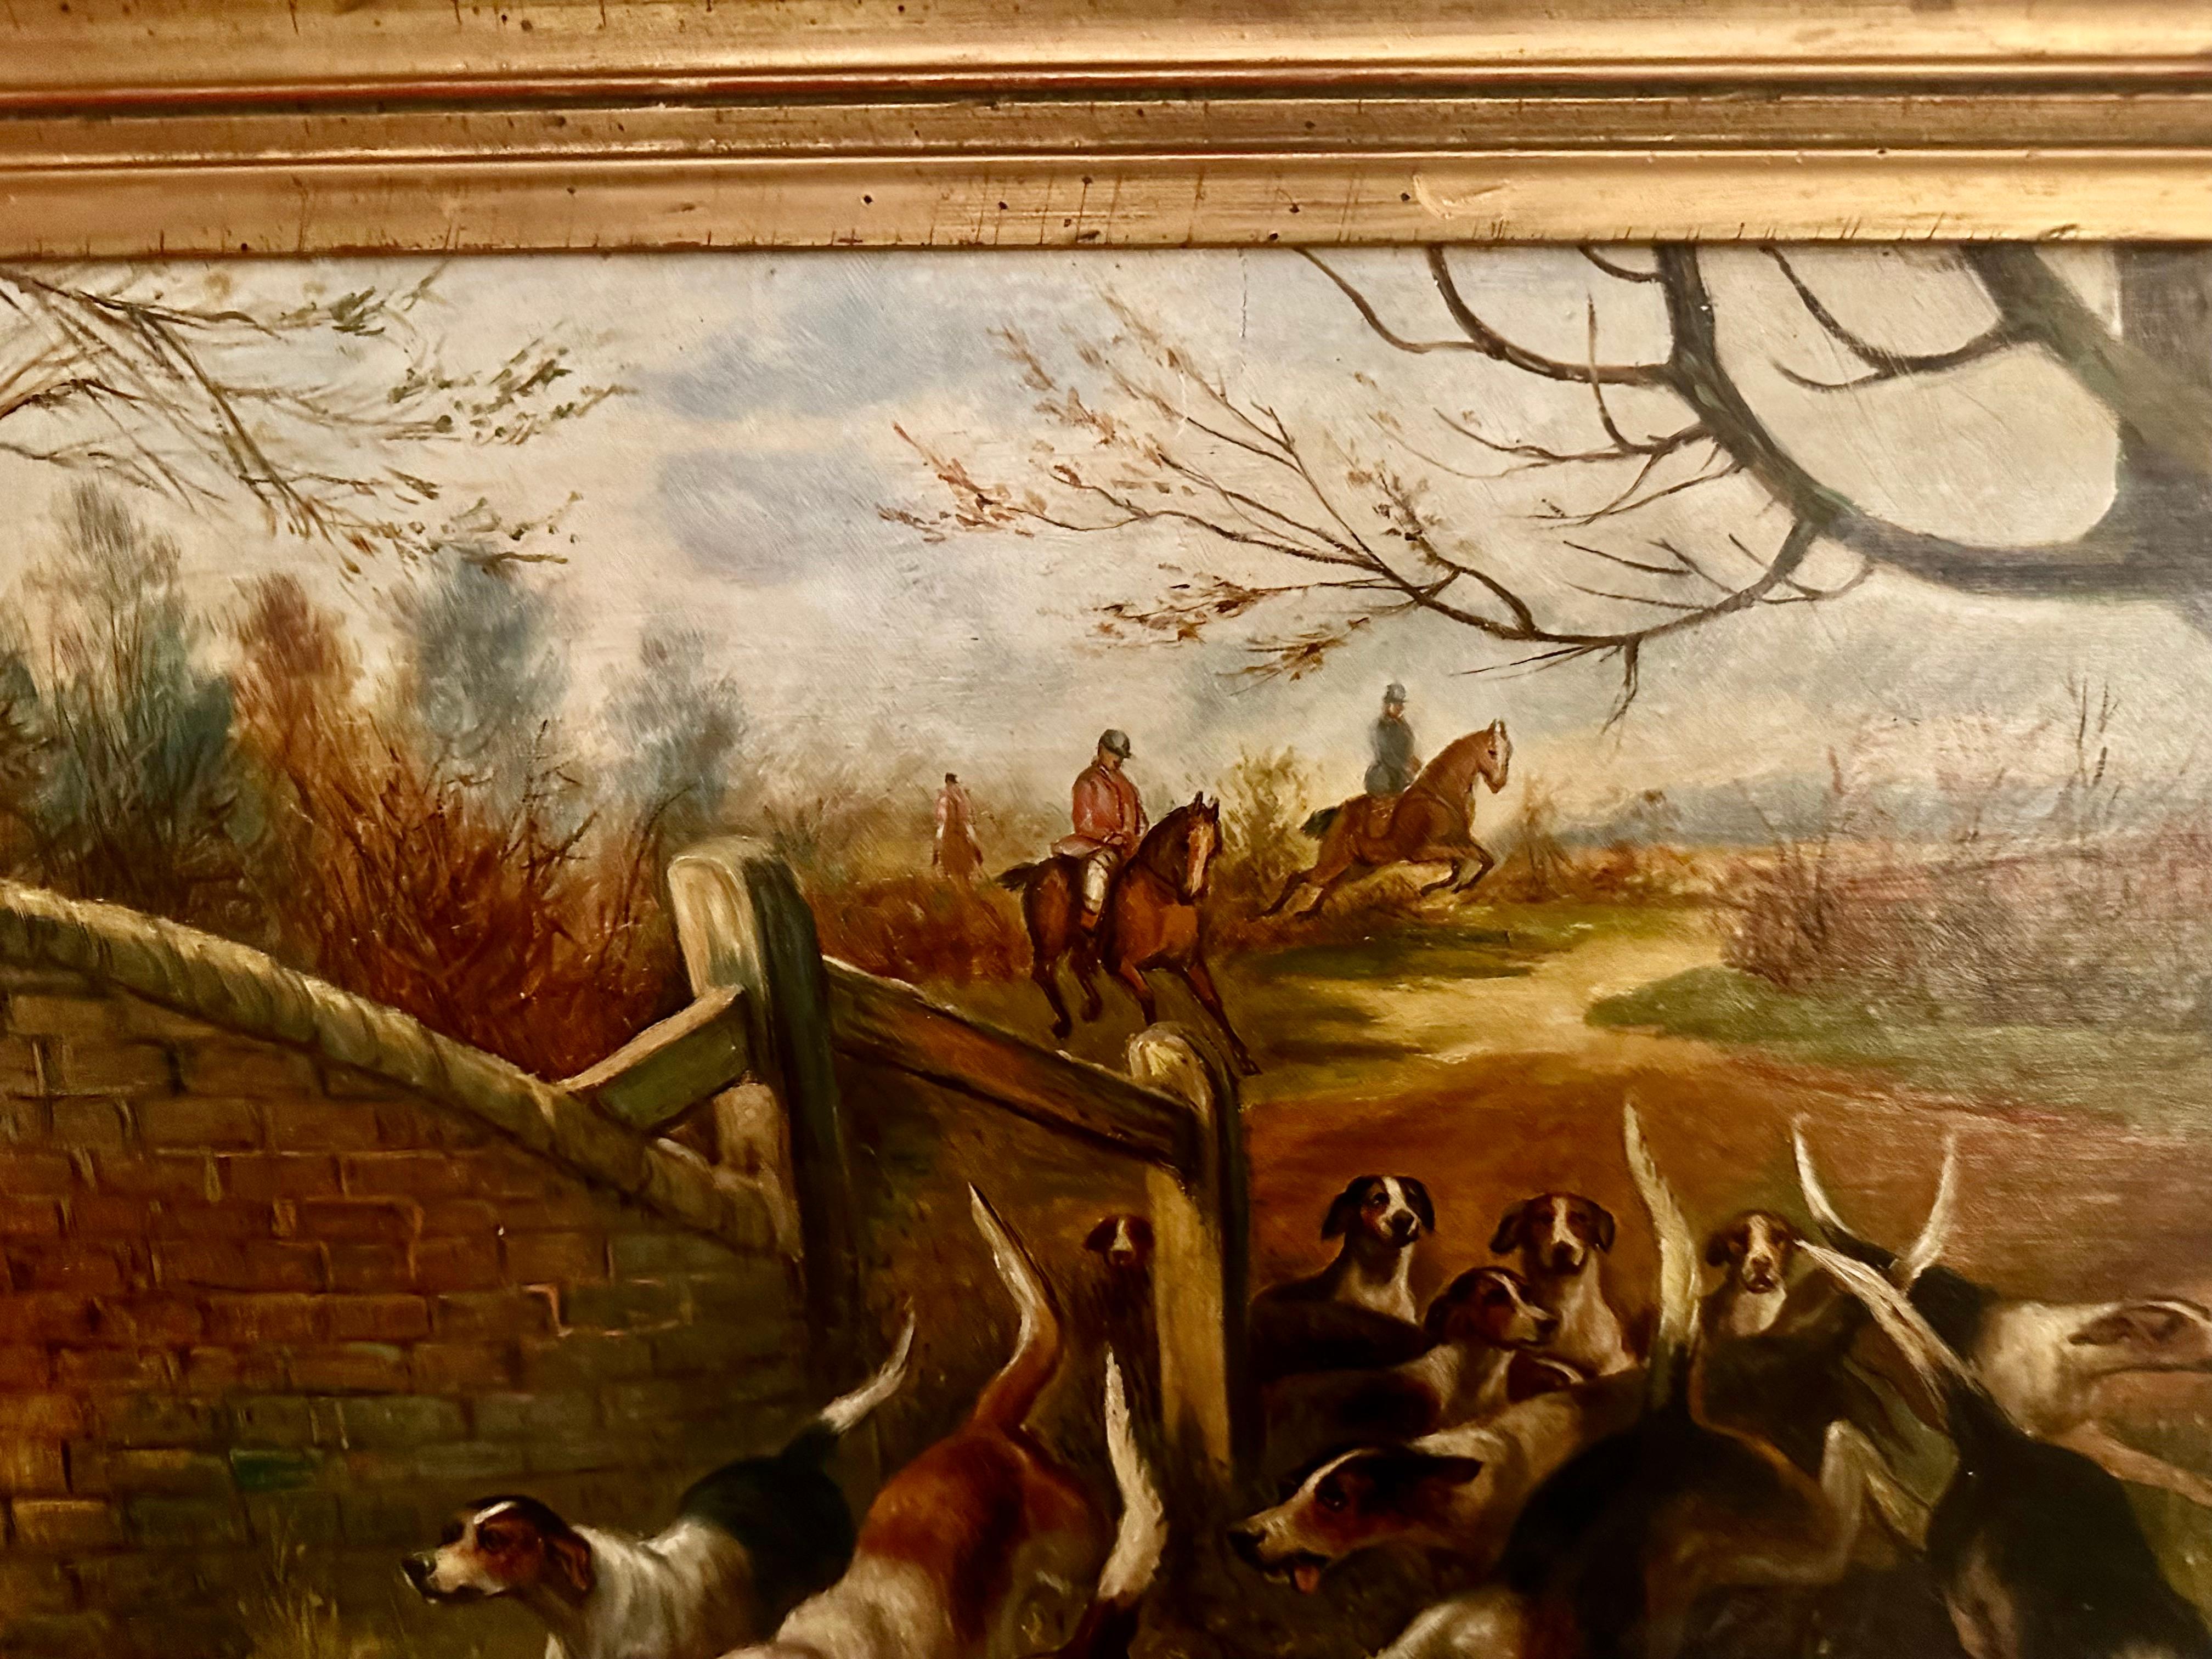 Artist Arthur Alfred Davis (British, 1877-1905)
“Into the River”
19th century sporting oil painting of dogs hunting

Image size: 30”x 20”
With frame: 35” x 25”

Oil on canvas landscape scene of hounds chasing a fox with horseback riders in the